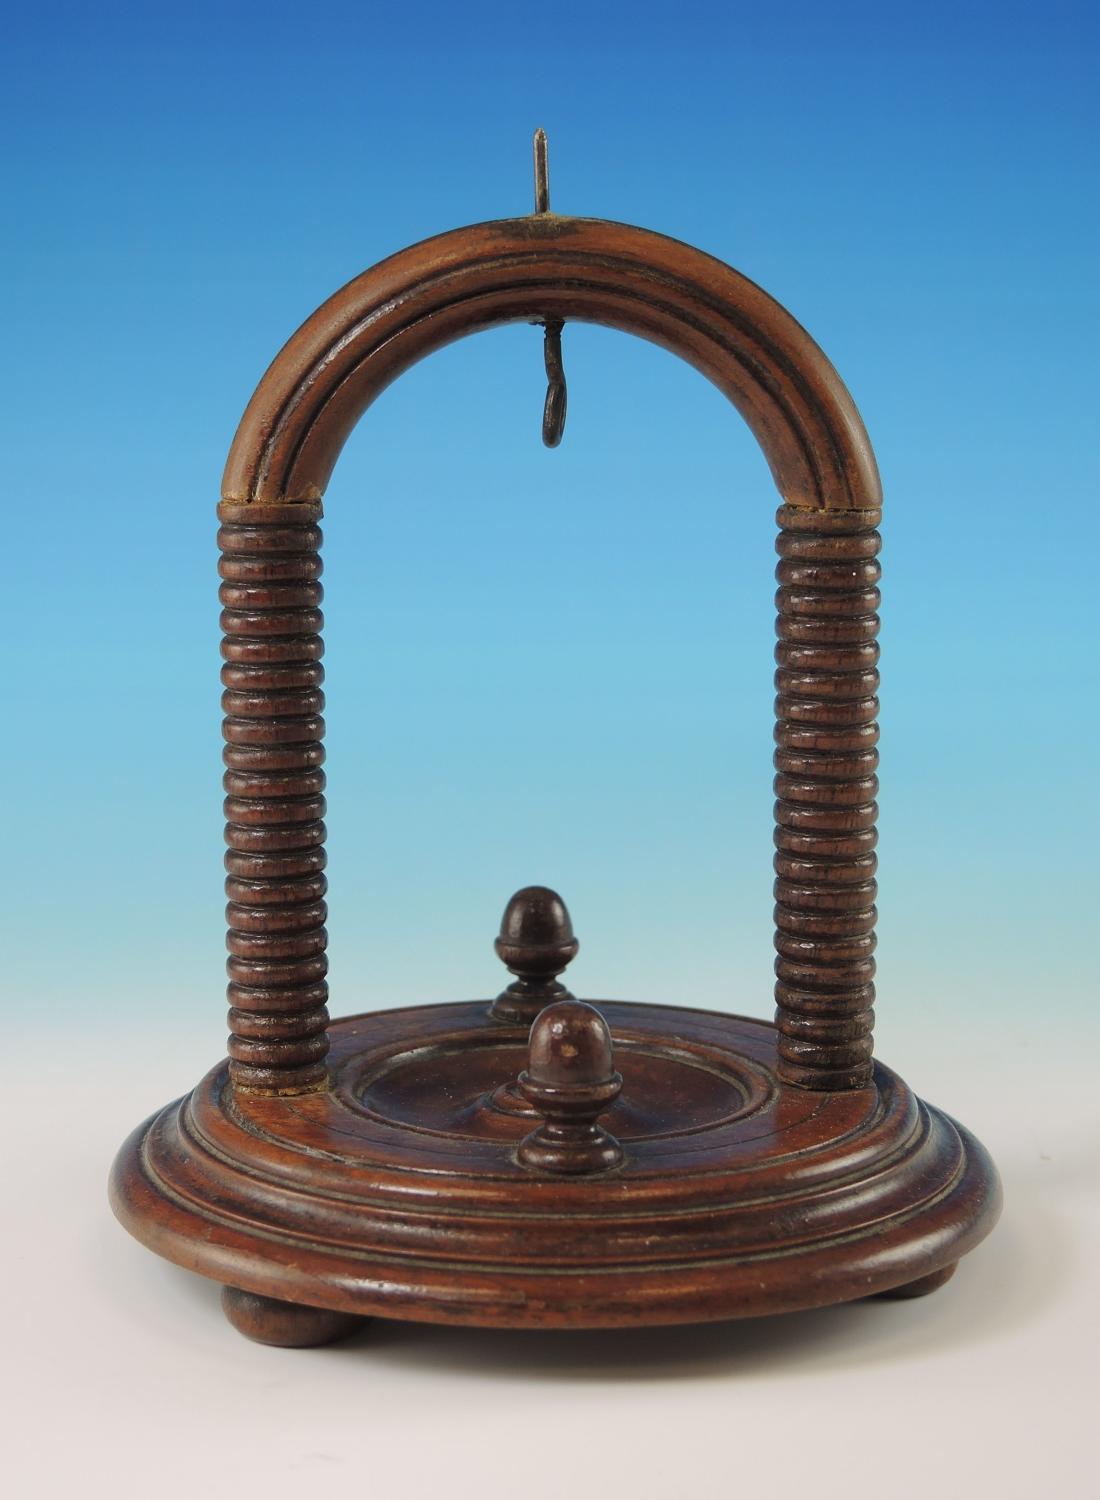 Wooden Pocket Watch with Unusual Turned Pillars. c1830